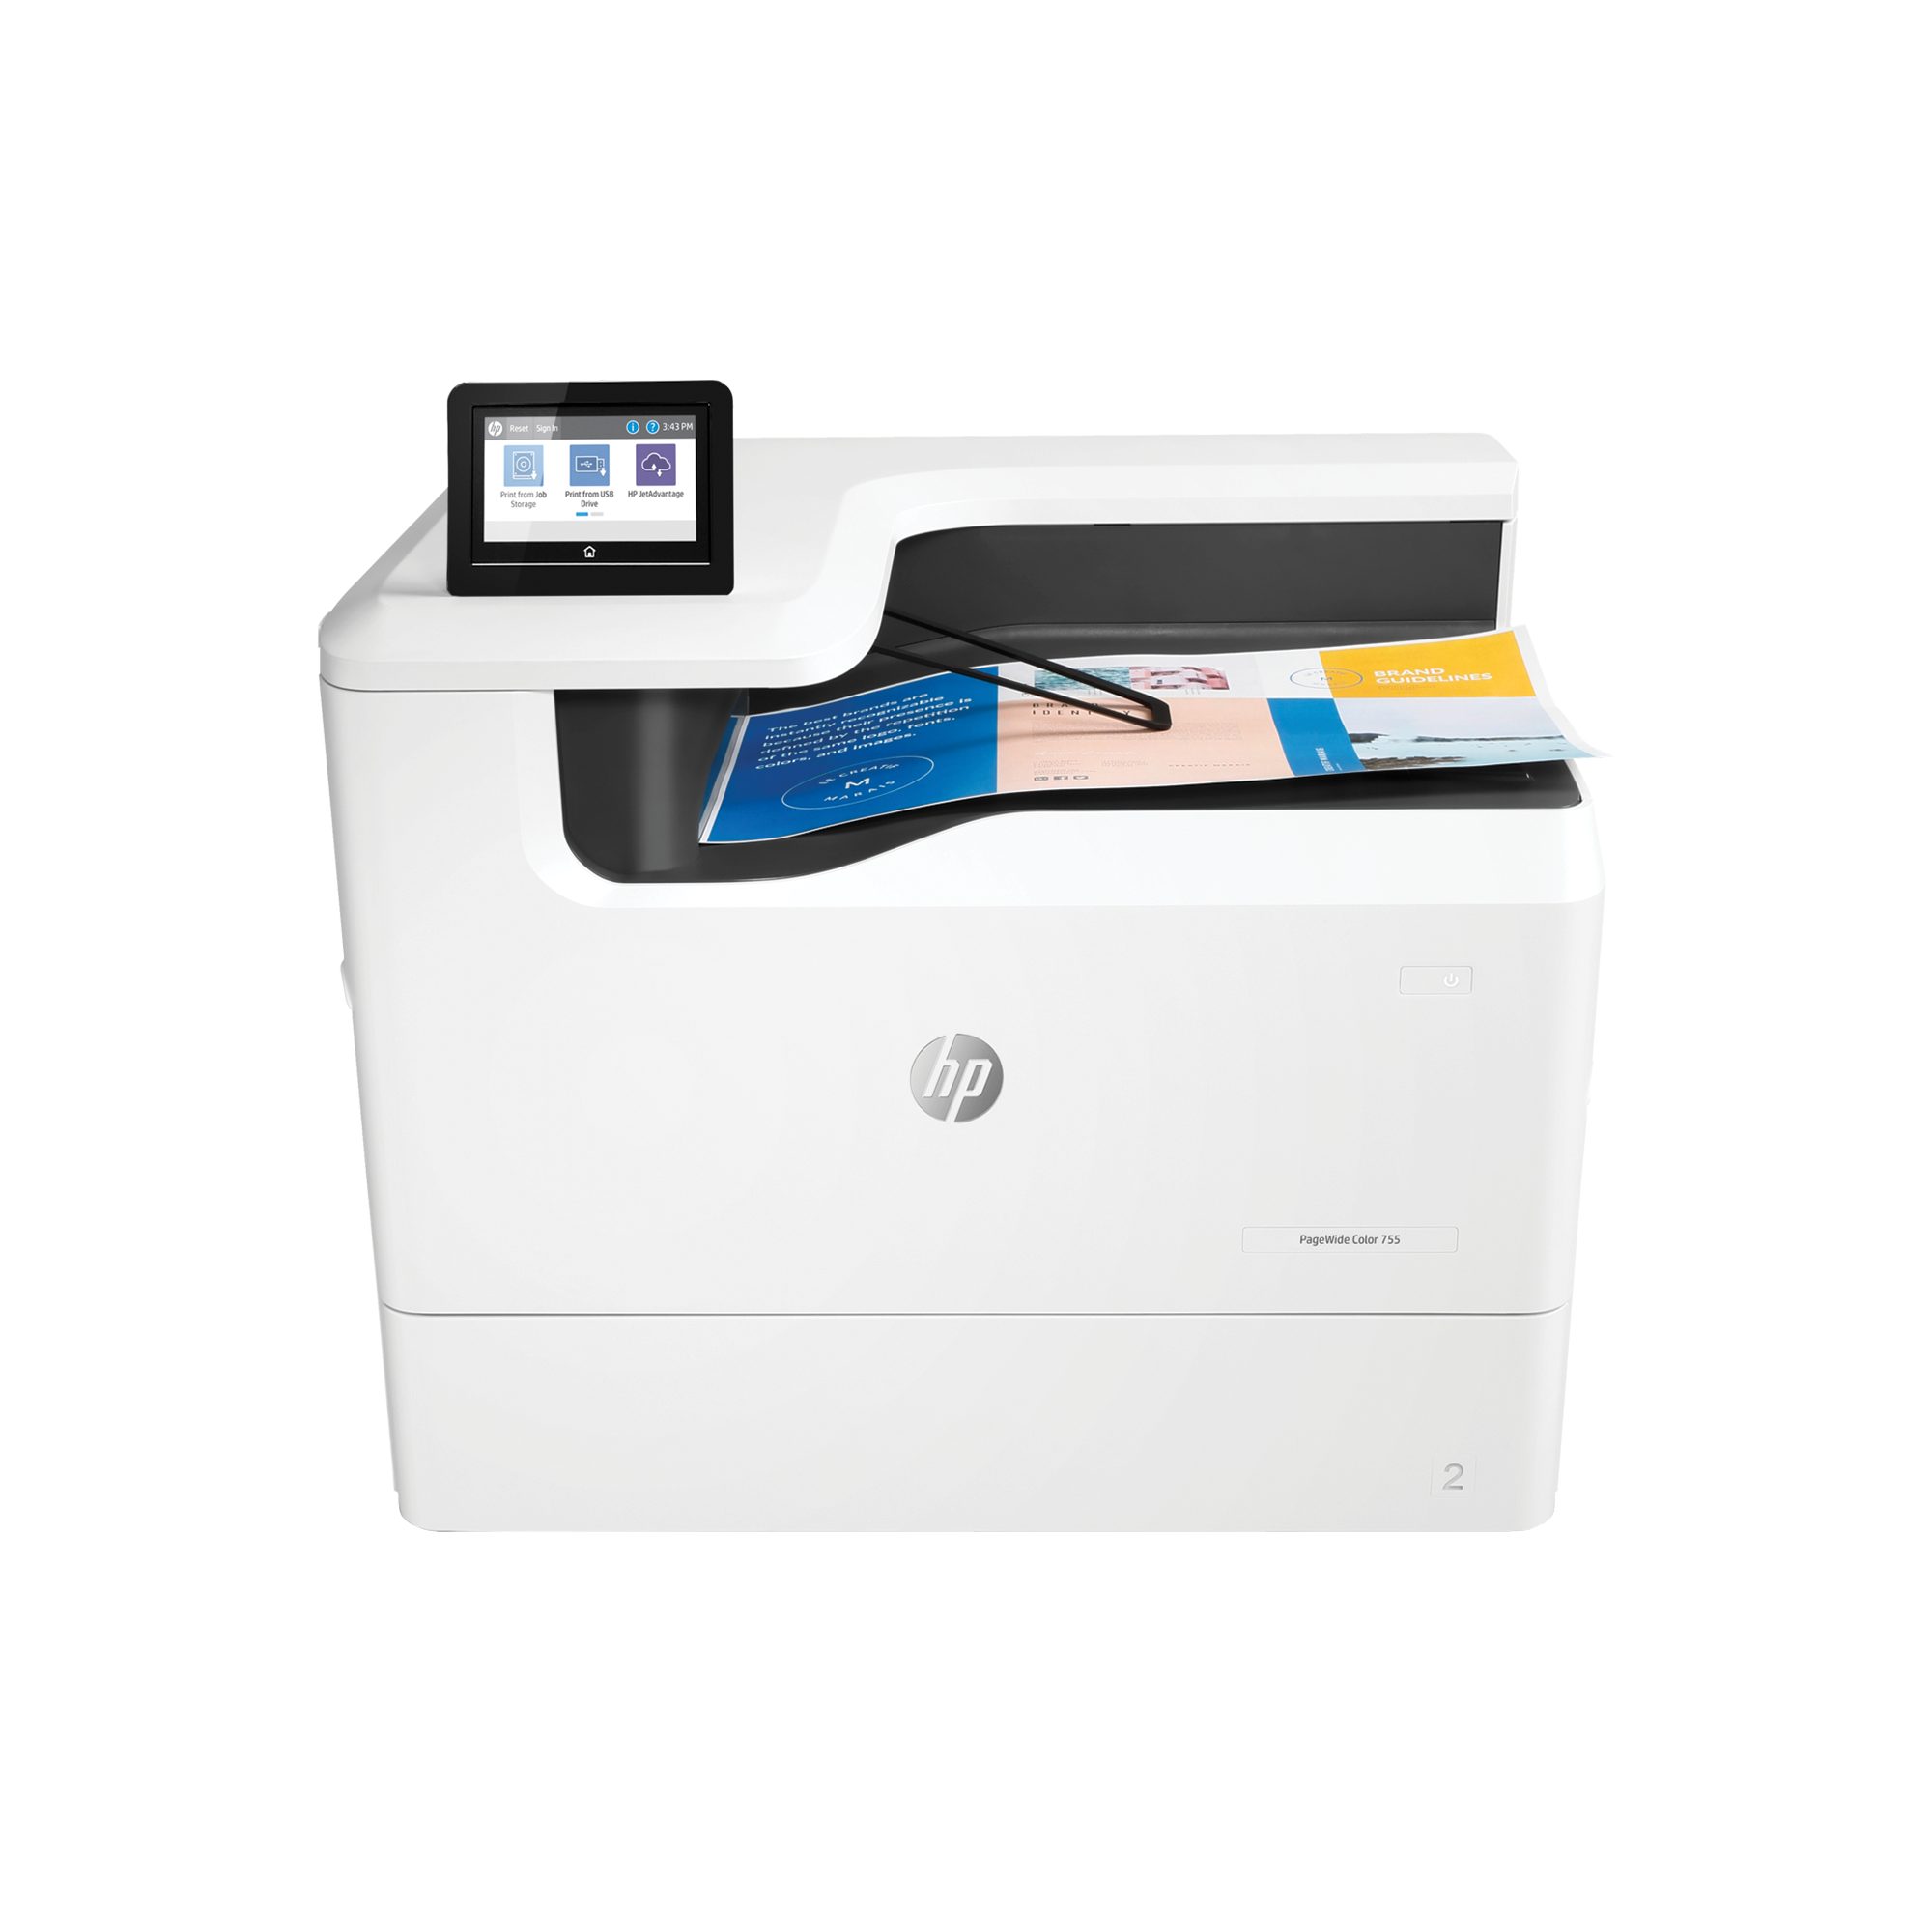 PageWide Color MFP 779 Printer series